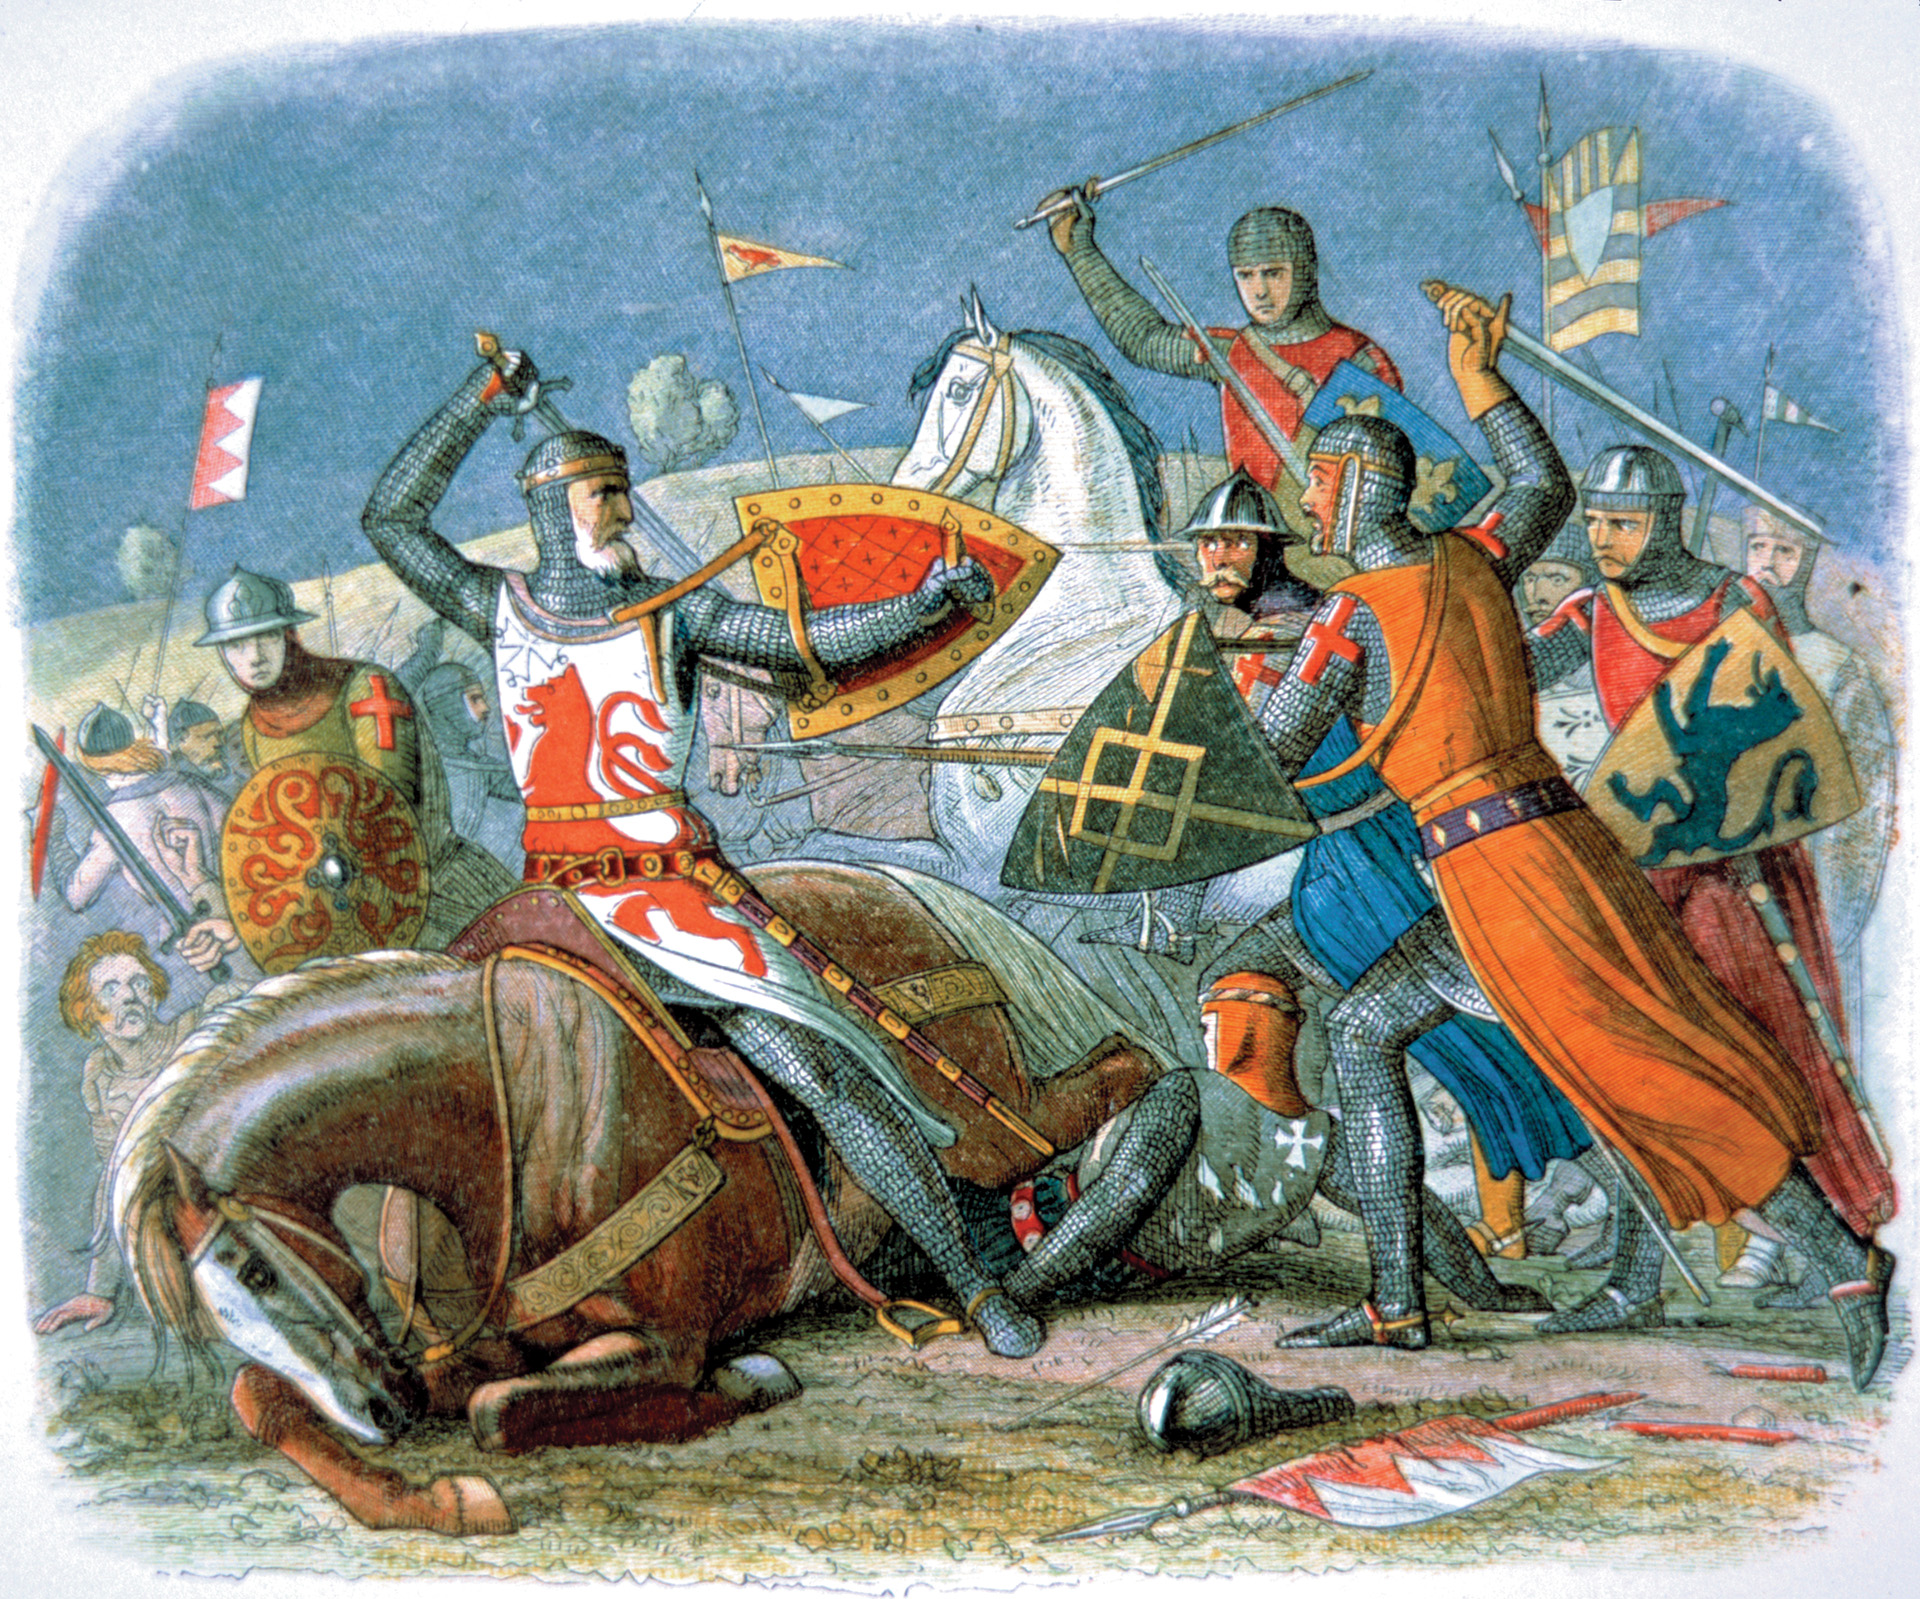 His horse crippled, Simon de Montfort nevertheless fights on against the Royalists closing in on him.  Simon had united the barons against the royal authority and he made reforms to the government, but some barons grew embittered of his rule and turned against him.  